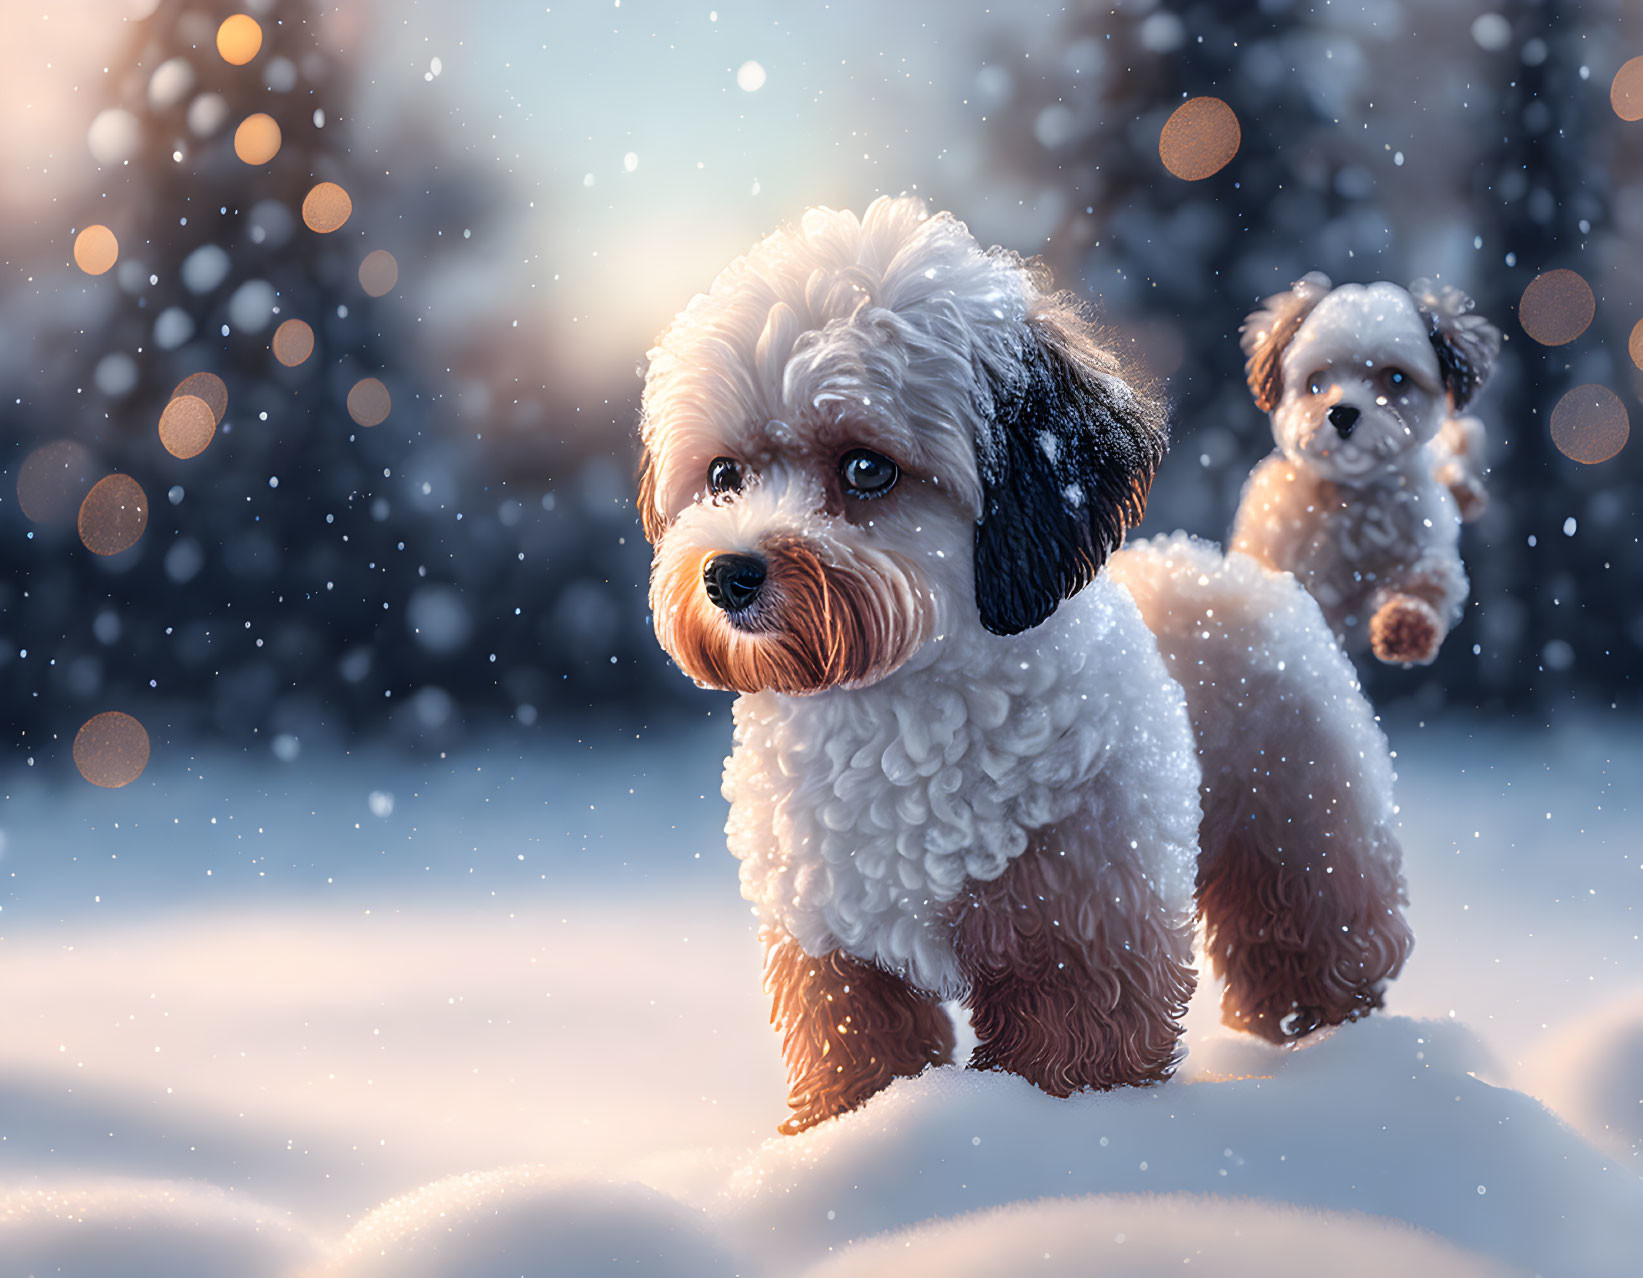 Fluffy dogs in snowy landscape with falling snowflakes